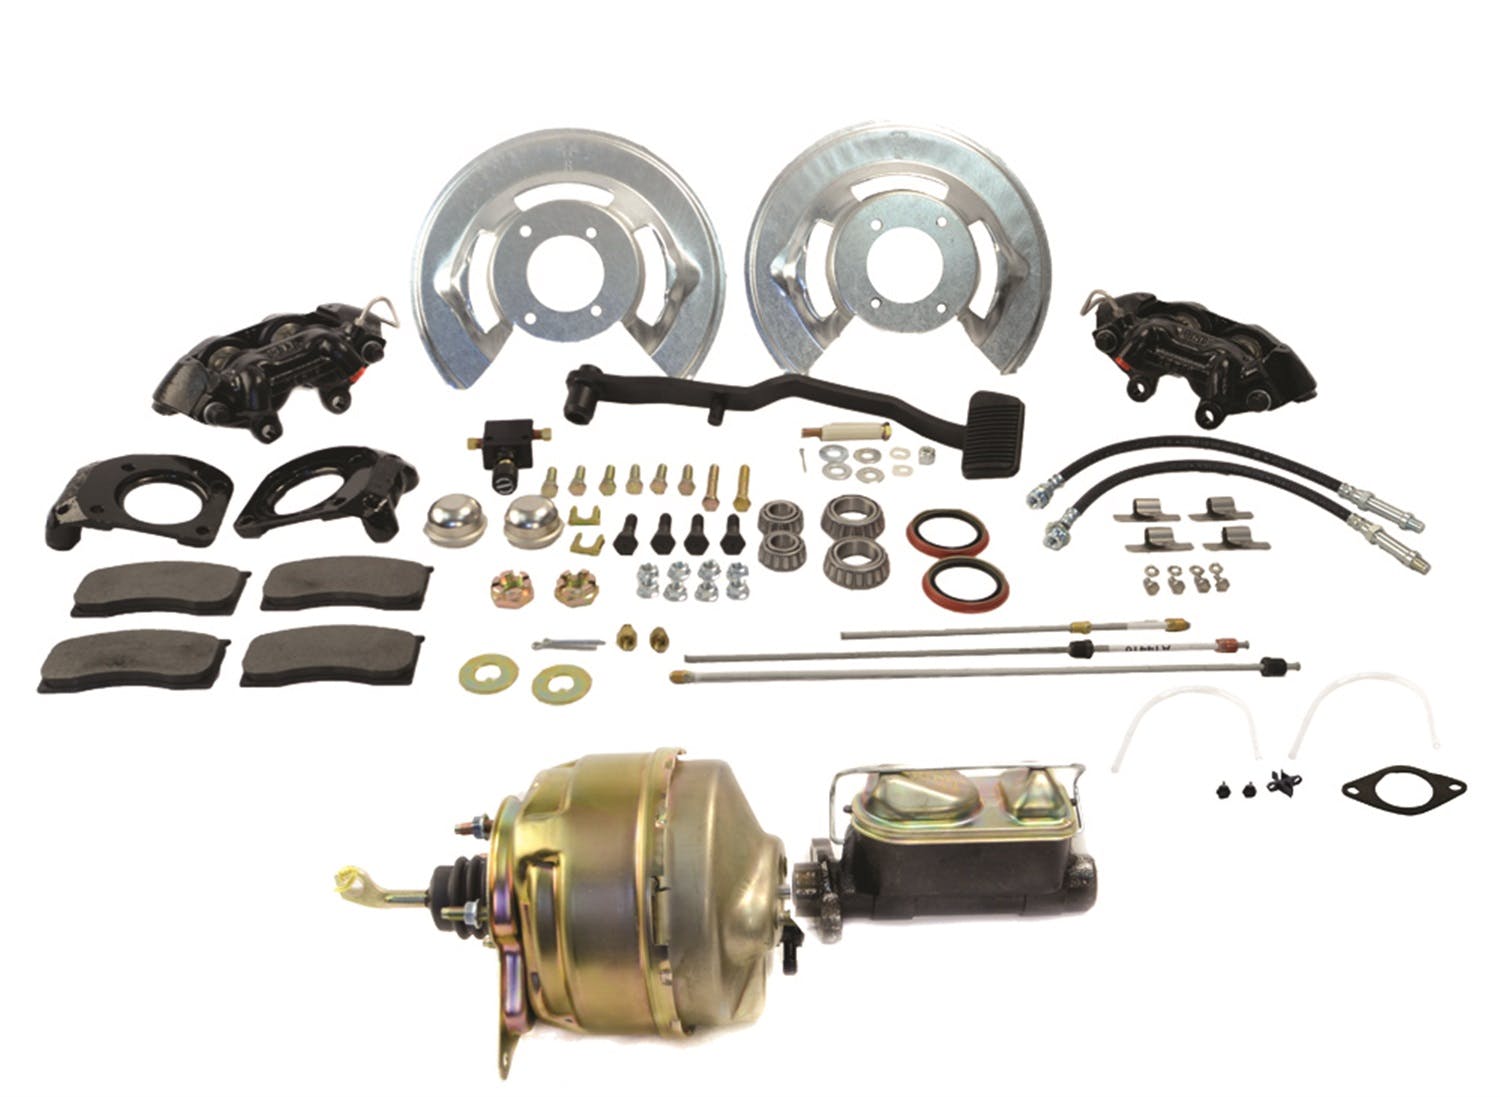 Stainless Steel Brakes A121-2 Front drm/dsc conv kit 67 Must. pwr. ma